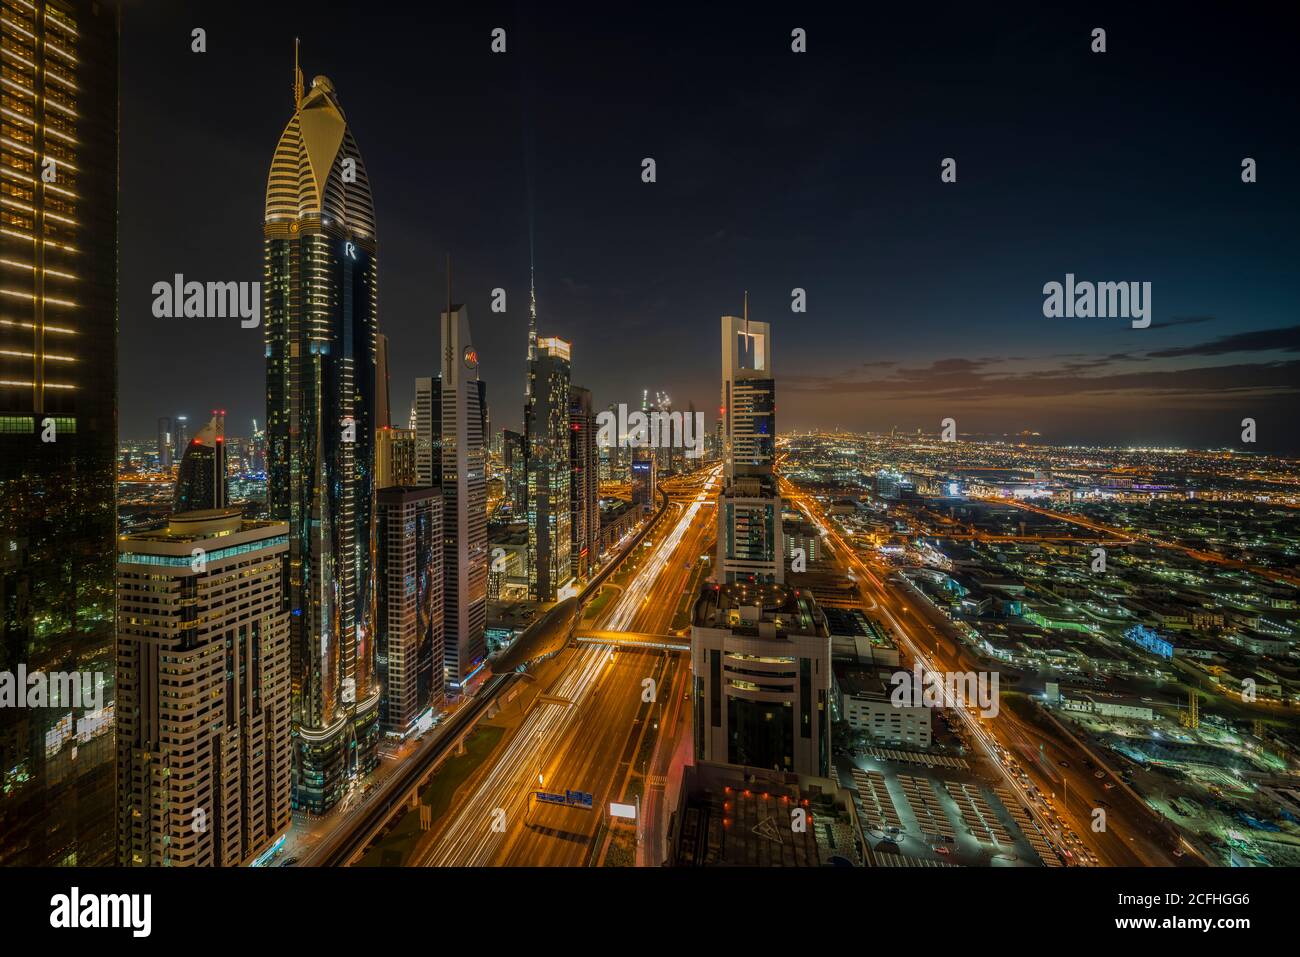 A view of the city skyline at dusk from the financial district of downtown Dubai, UAE, Middle East. Stock Photo